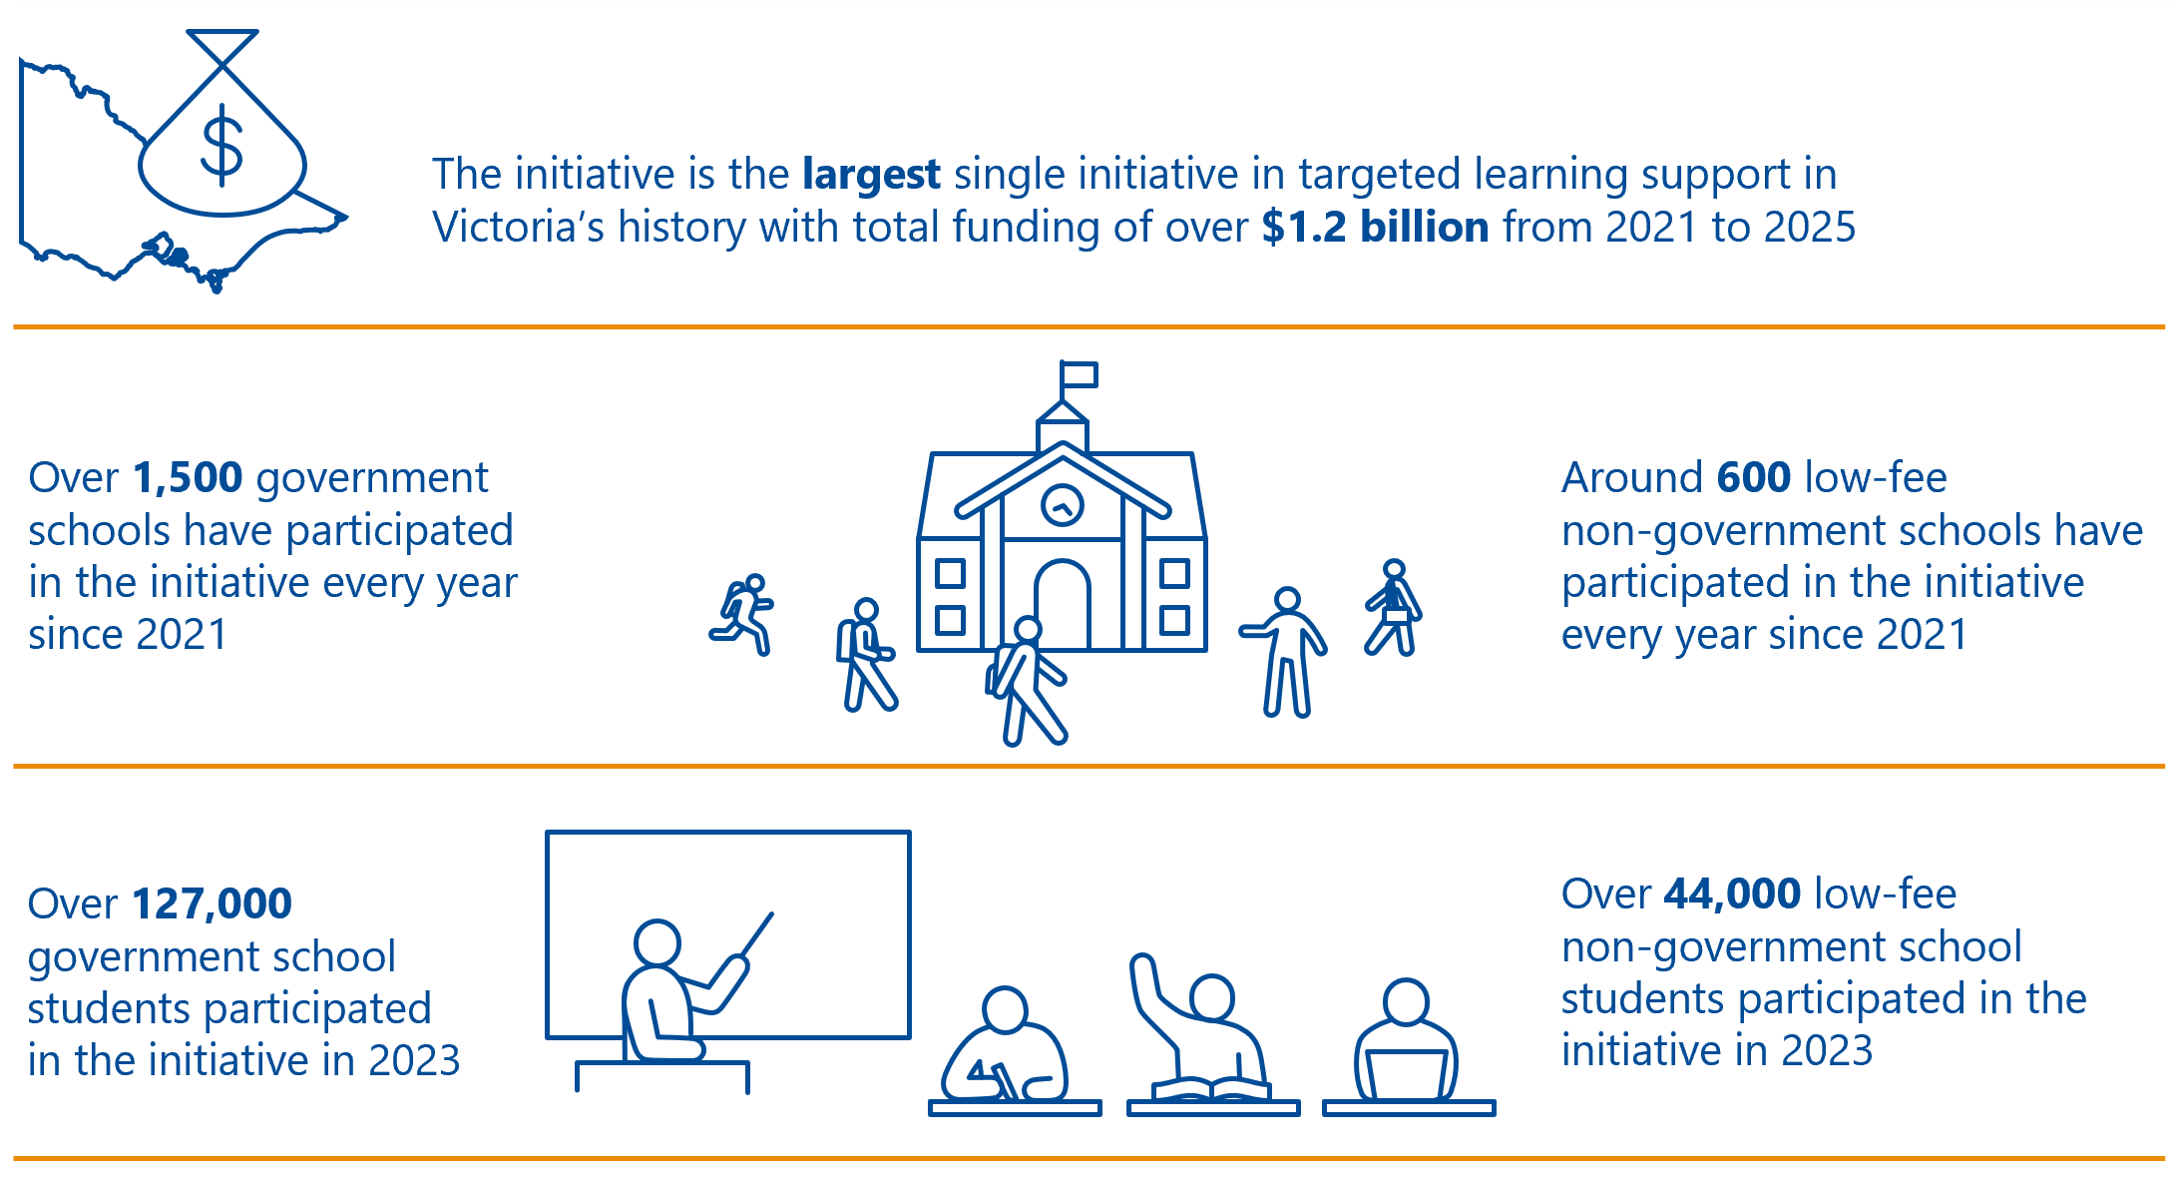 This infographic lists five key facts about the tutor learning initiative. The initiative is the largest single initiative in targeted learning support in Victoria’s history with total funding of over $1.2 billion from 2021 to 2025. Over 1,500 government schools have participated in the initiative every year since 2021. Around 600 low-fee non-government schools have participated in the initiative every year since 2021. Over 127,000 government school students participated in the initiative in 2023. Over 44,000 low-fee non-government school students participated in the initiative in 2023.